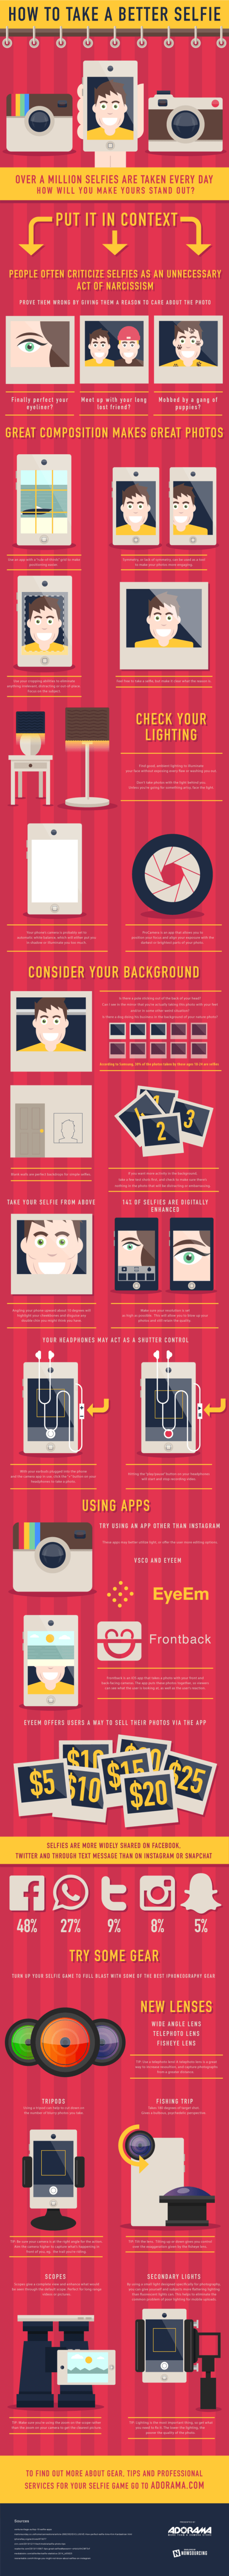 How to take a better selfie - Adorama Infographic